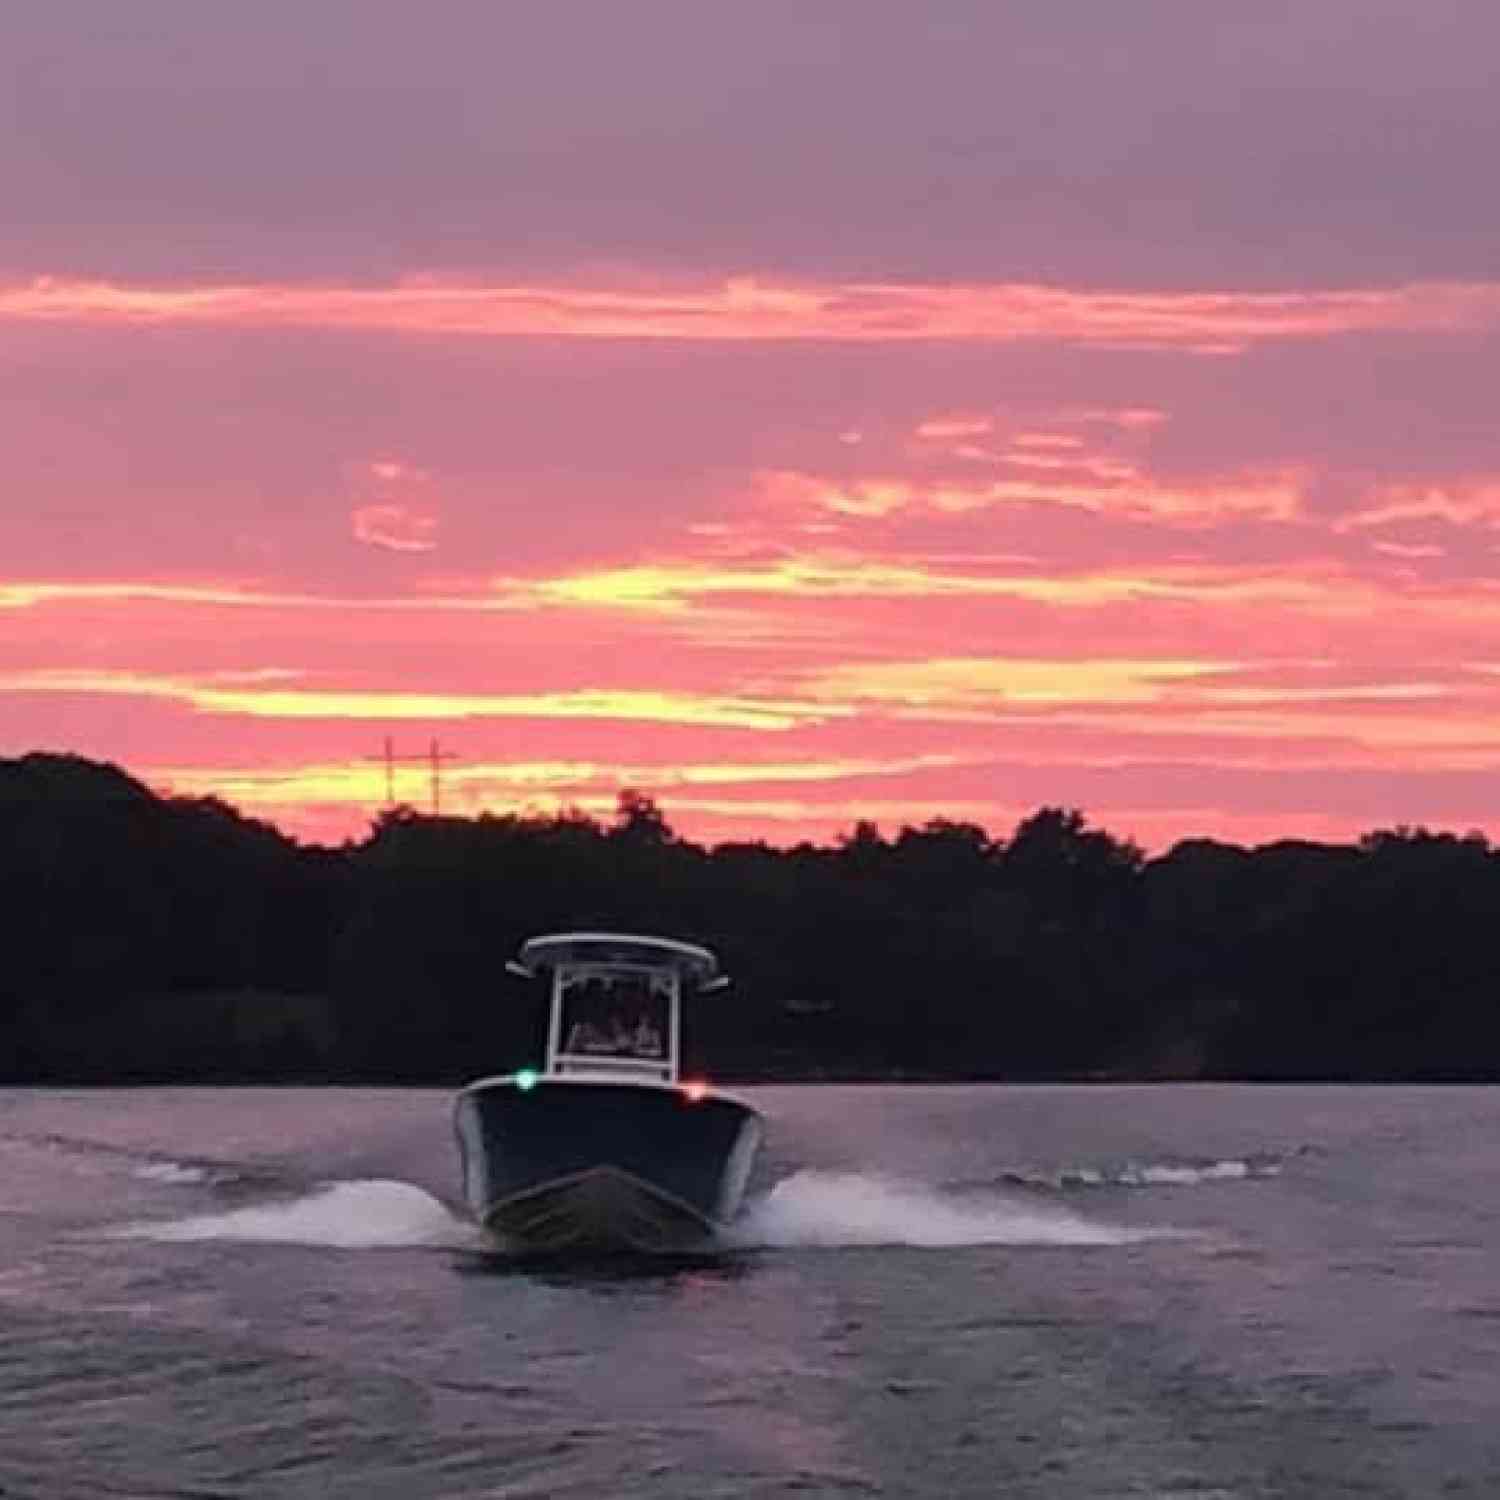 Title: Fleeing the Storm - On board their Sportsman Open 212 Center Console - Location: Lake Jordan Alabama. Participating in the Photo Contest #SportsmanSeptember2020